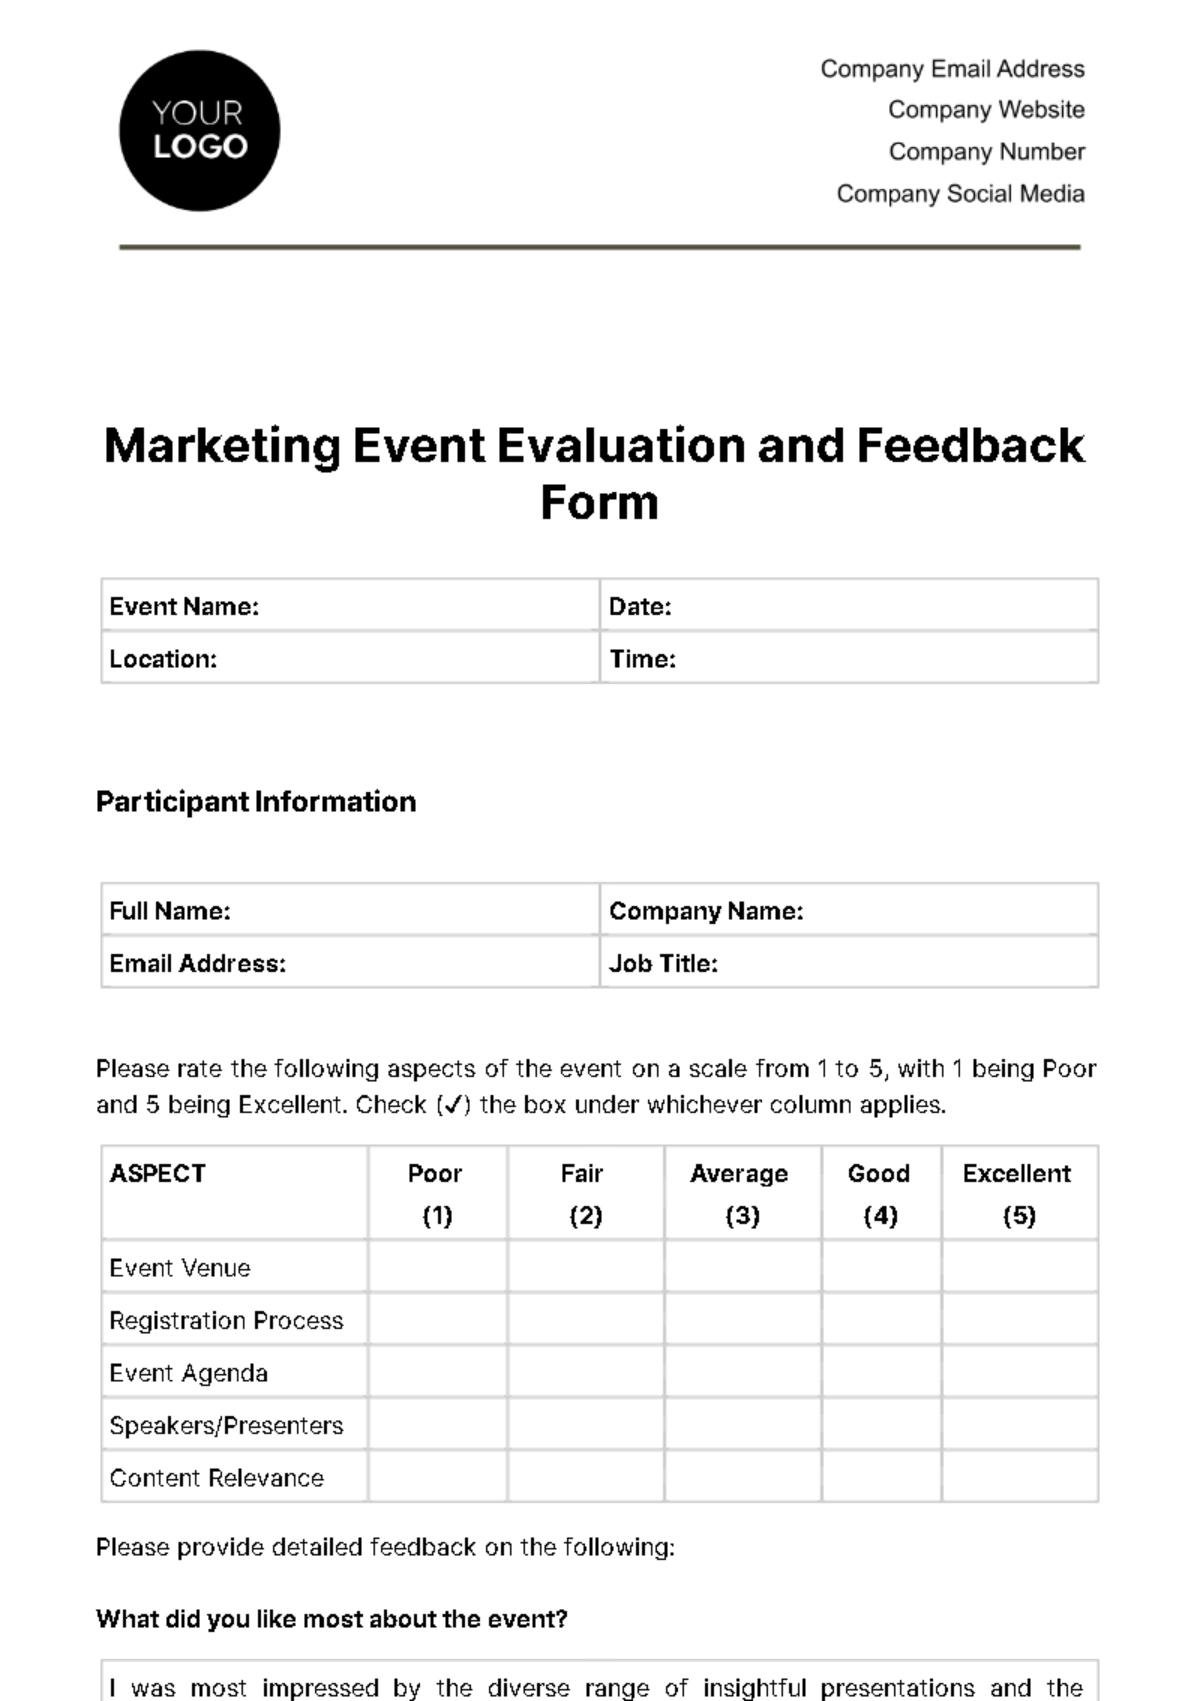 Marketing Event Evaluation and Feedback Form Template